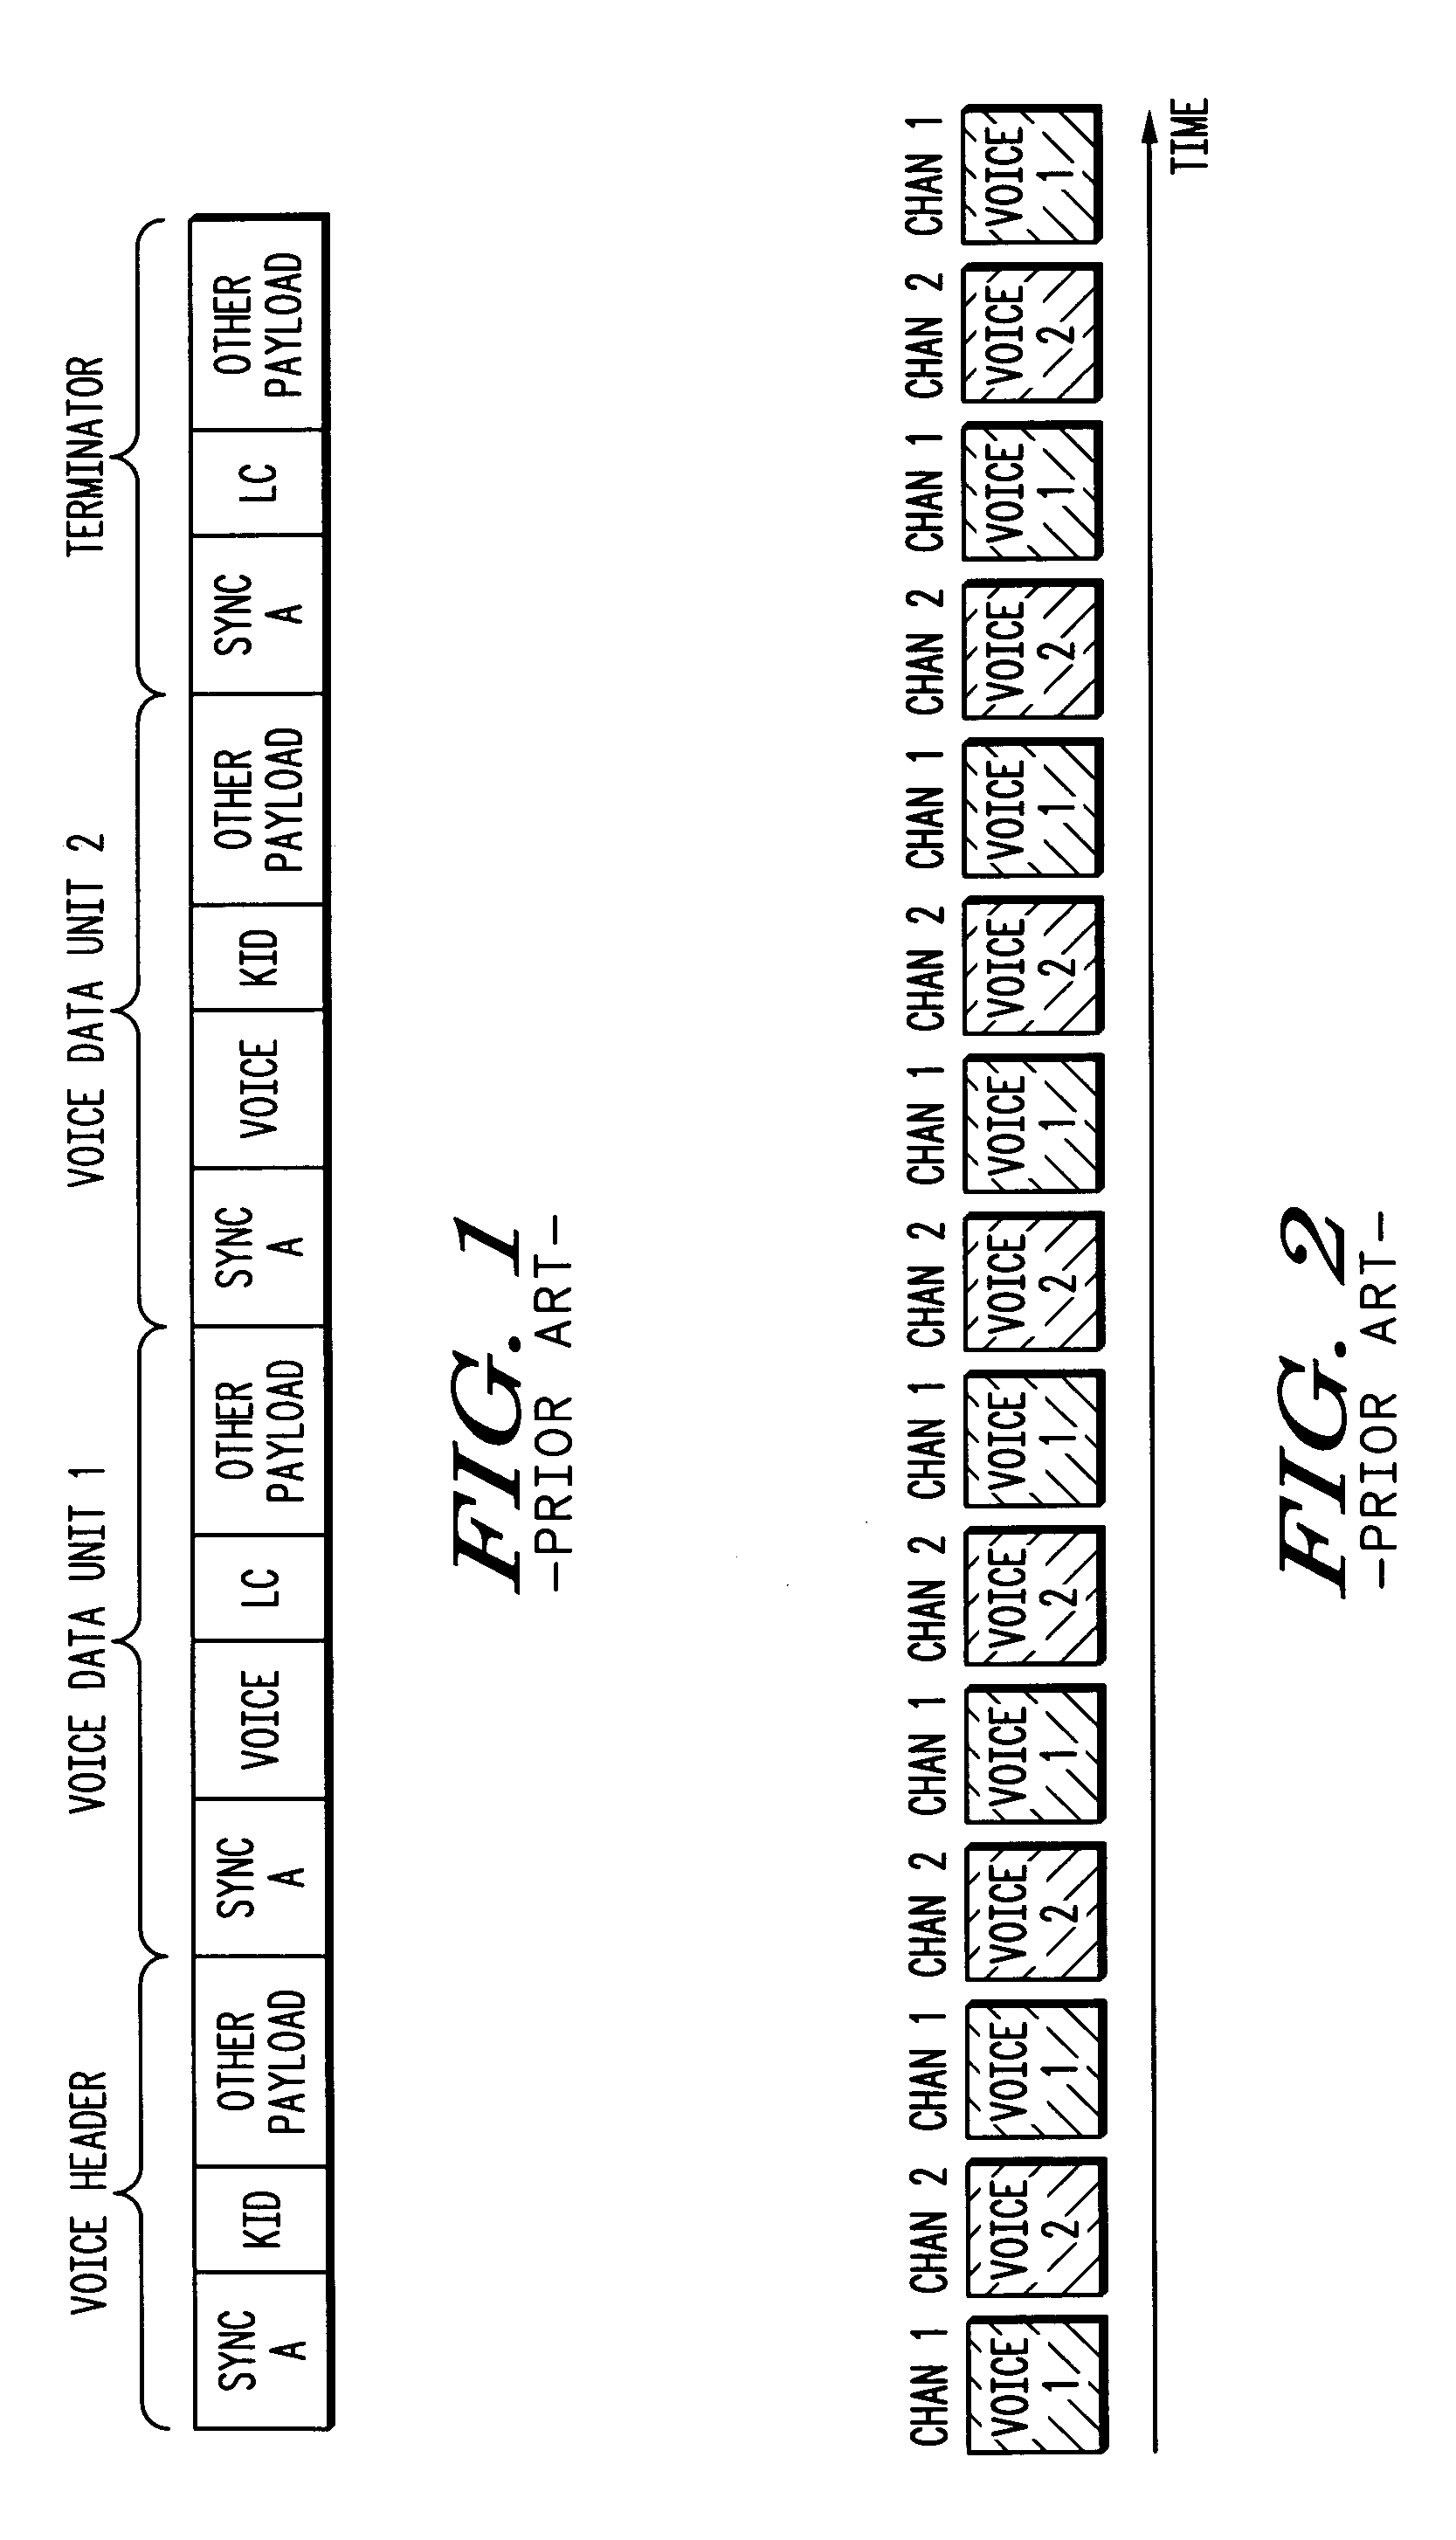 Method for selectively allocating a limited number of bits to support multiple signaling types on a low bit rate channel